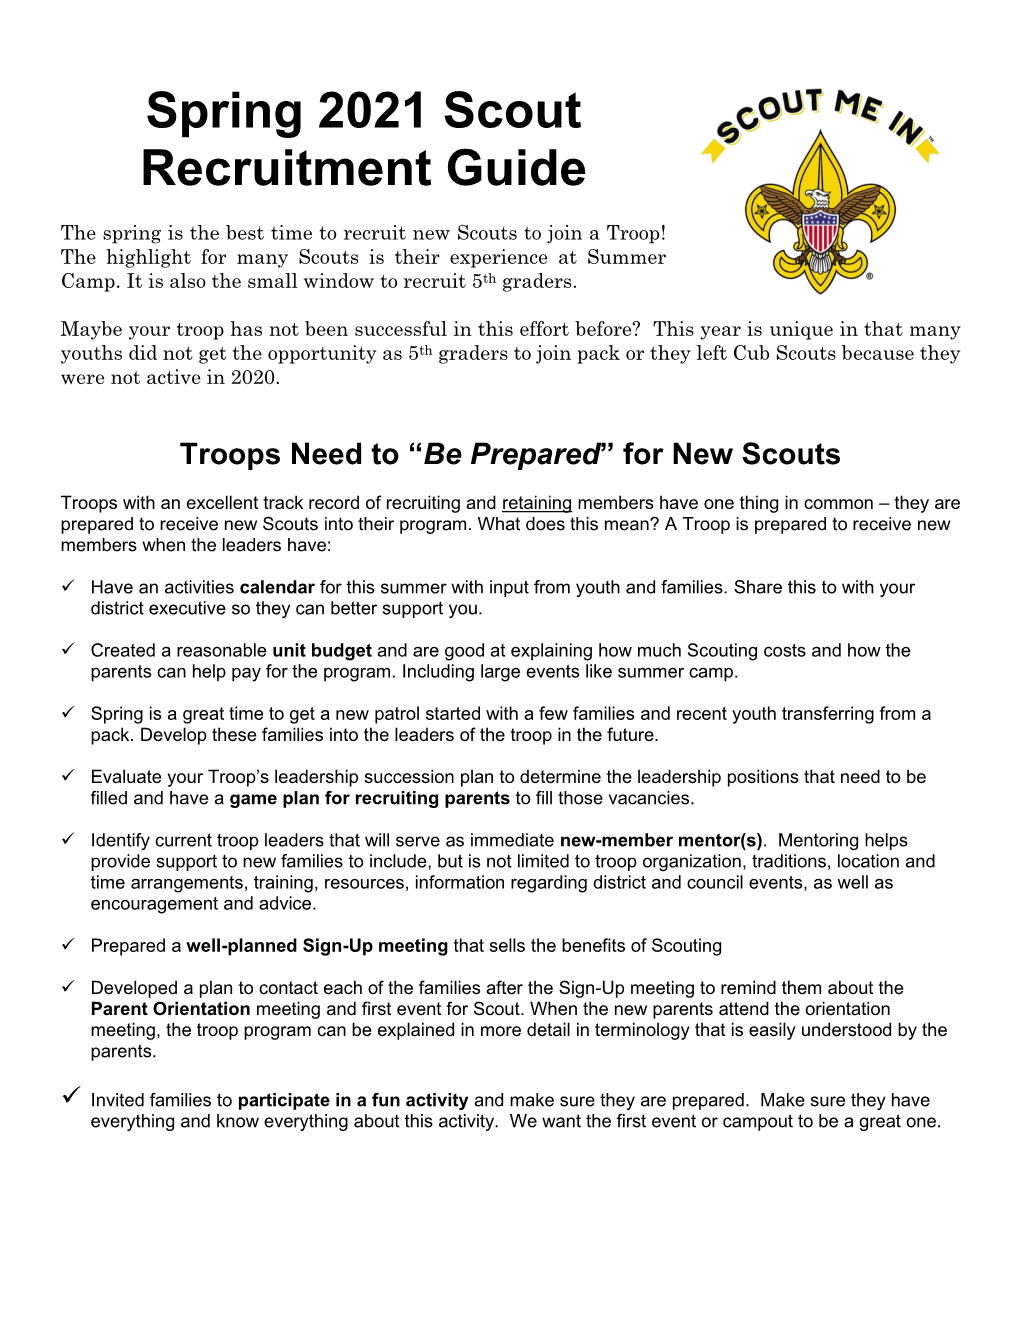 Spring 2021 Scout Recruitment Guide